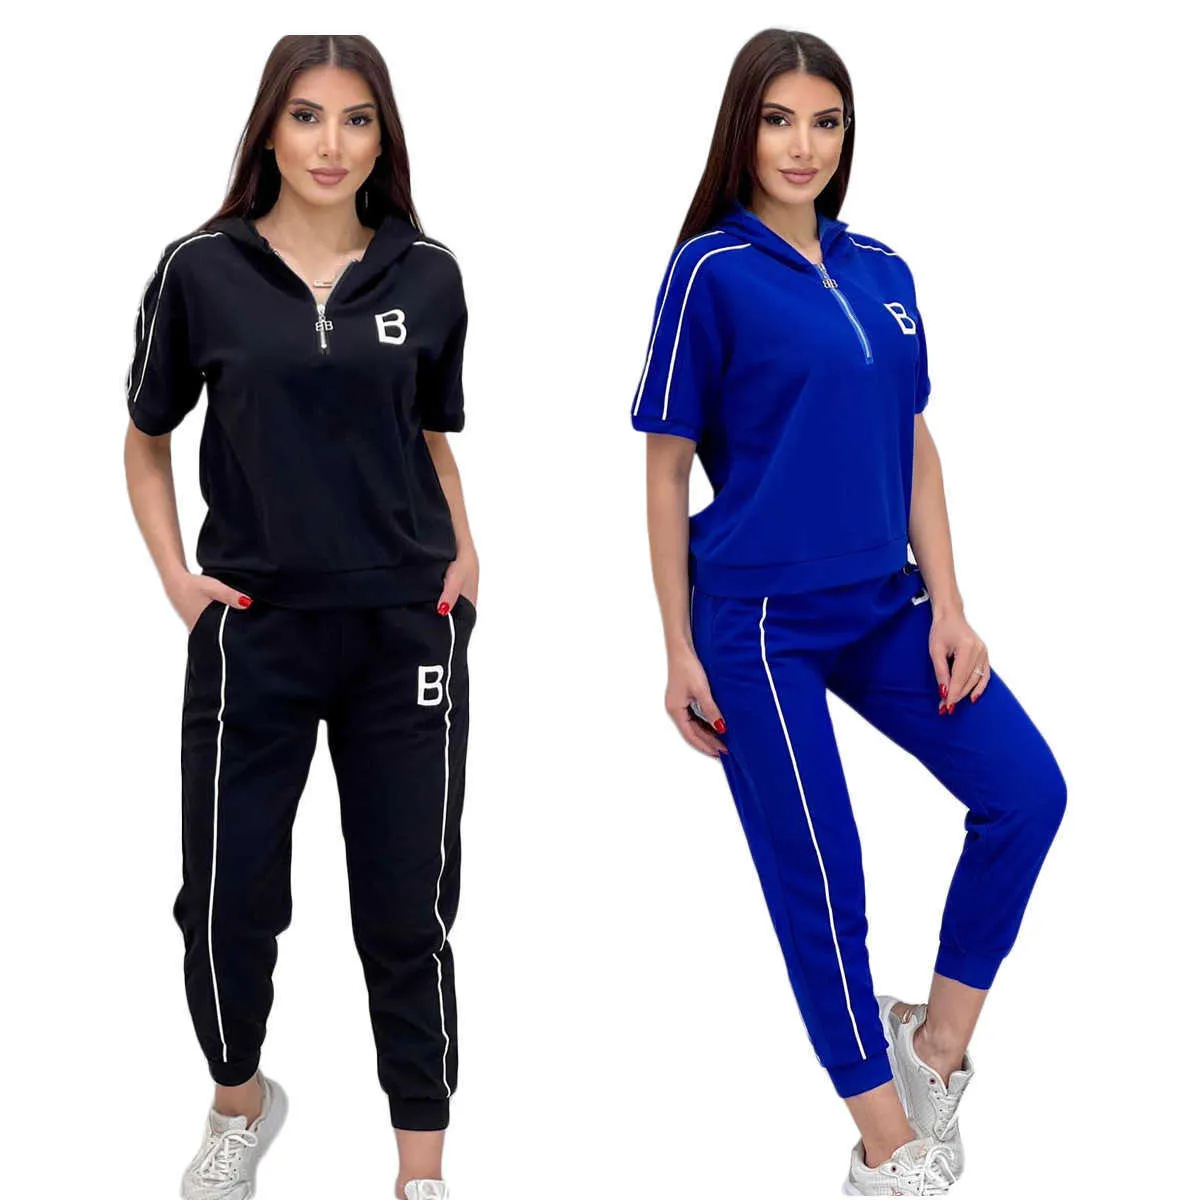 Women's Tracksuits 24ss designerJ2805 Womens New Fashion Hooded Embroidered Casual Womens Short Sleeve Two Piece Set sport Tracksuits